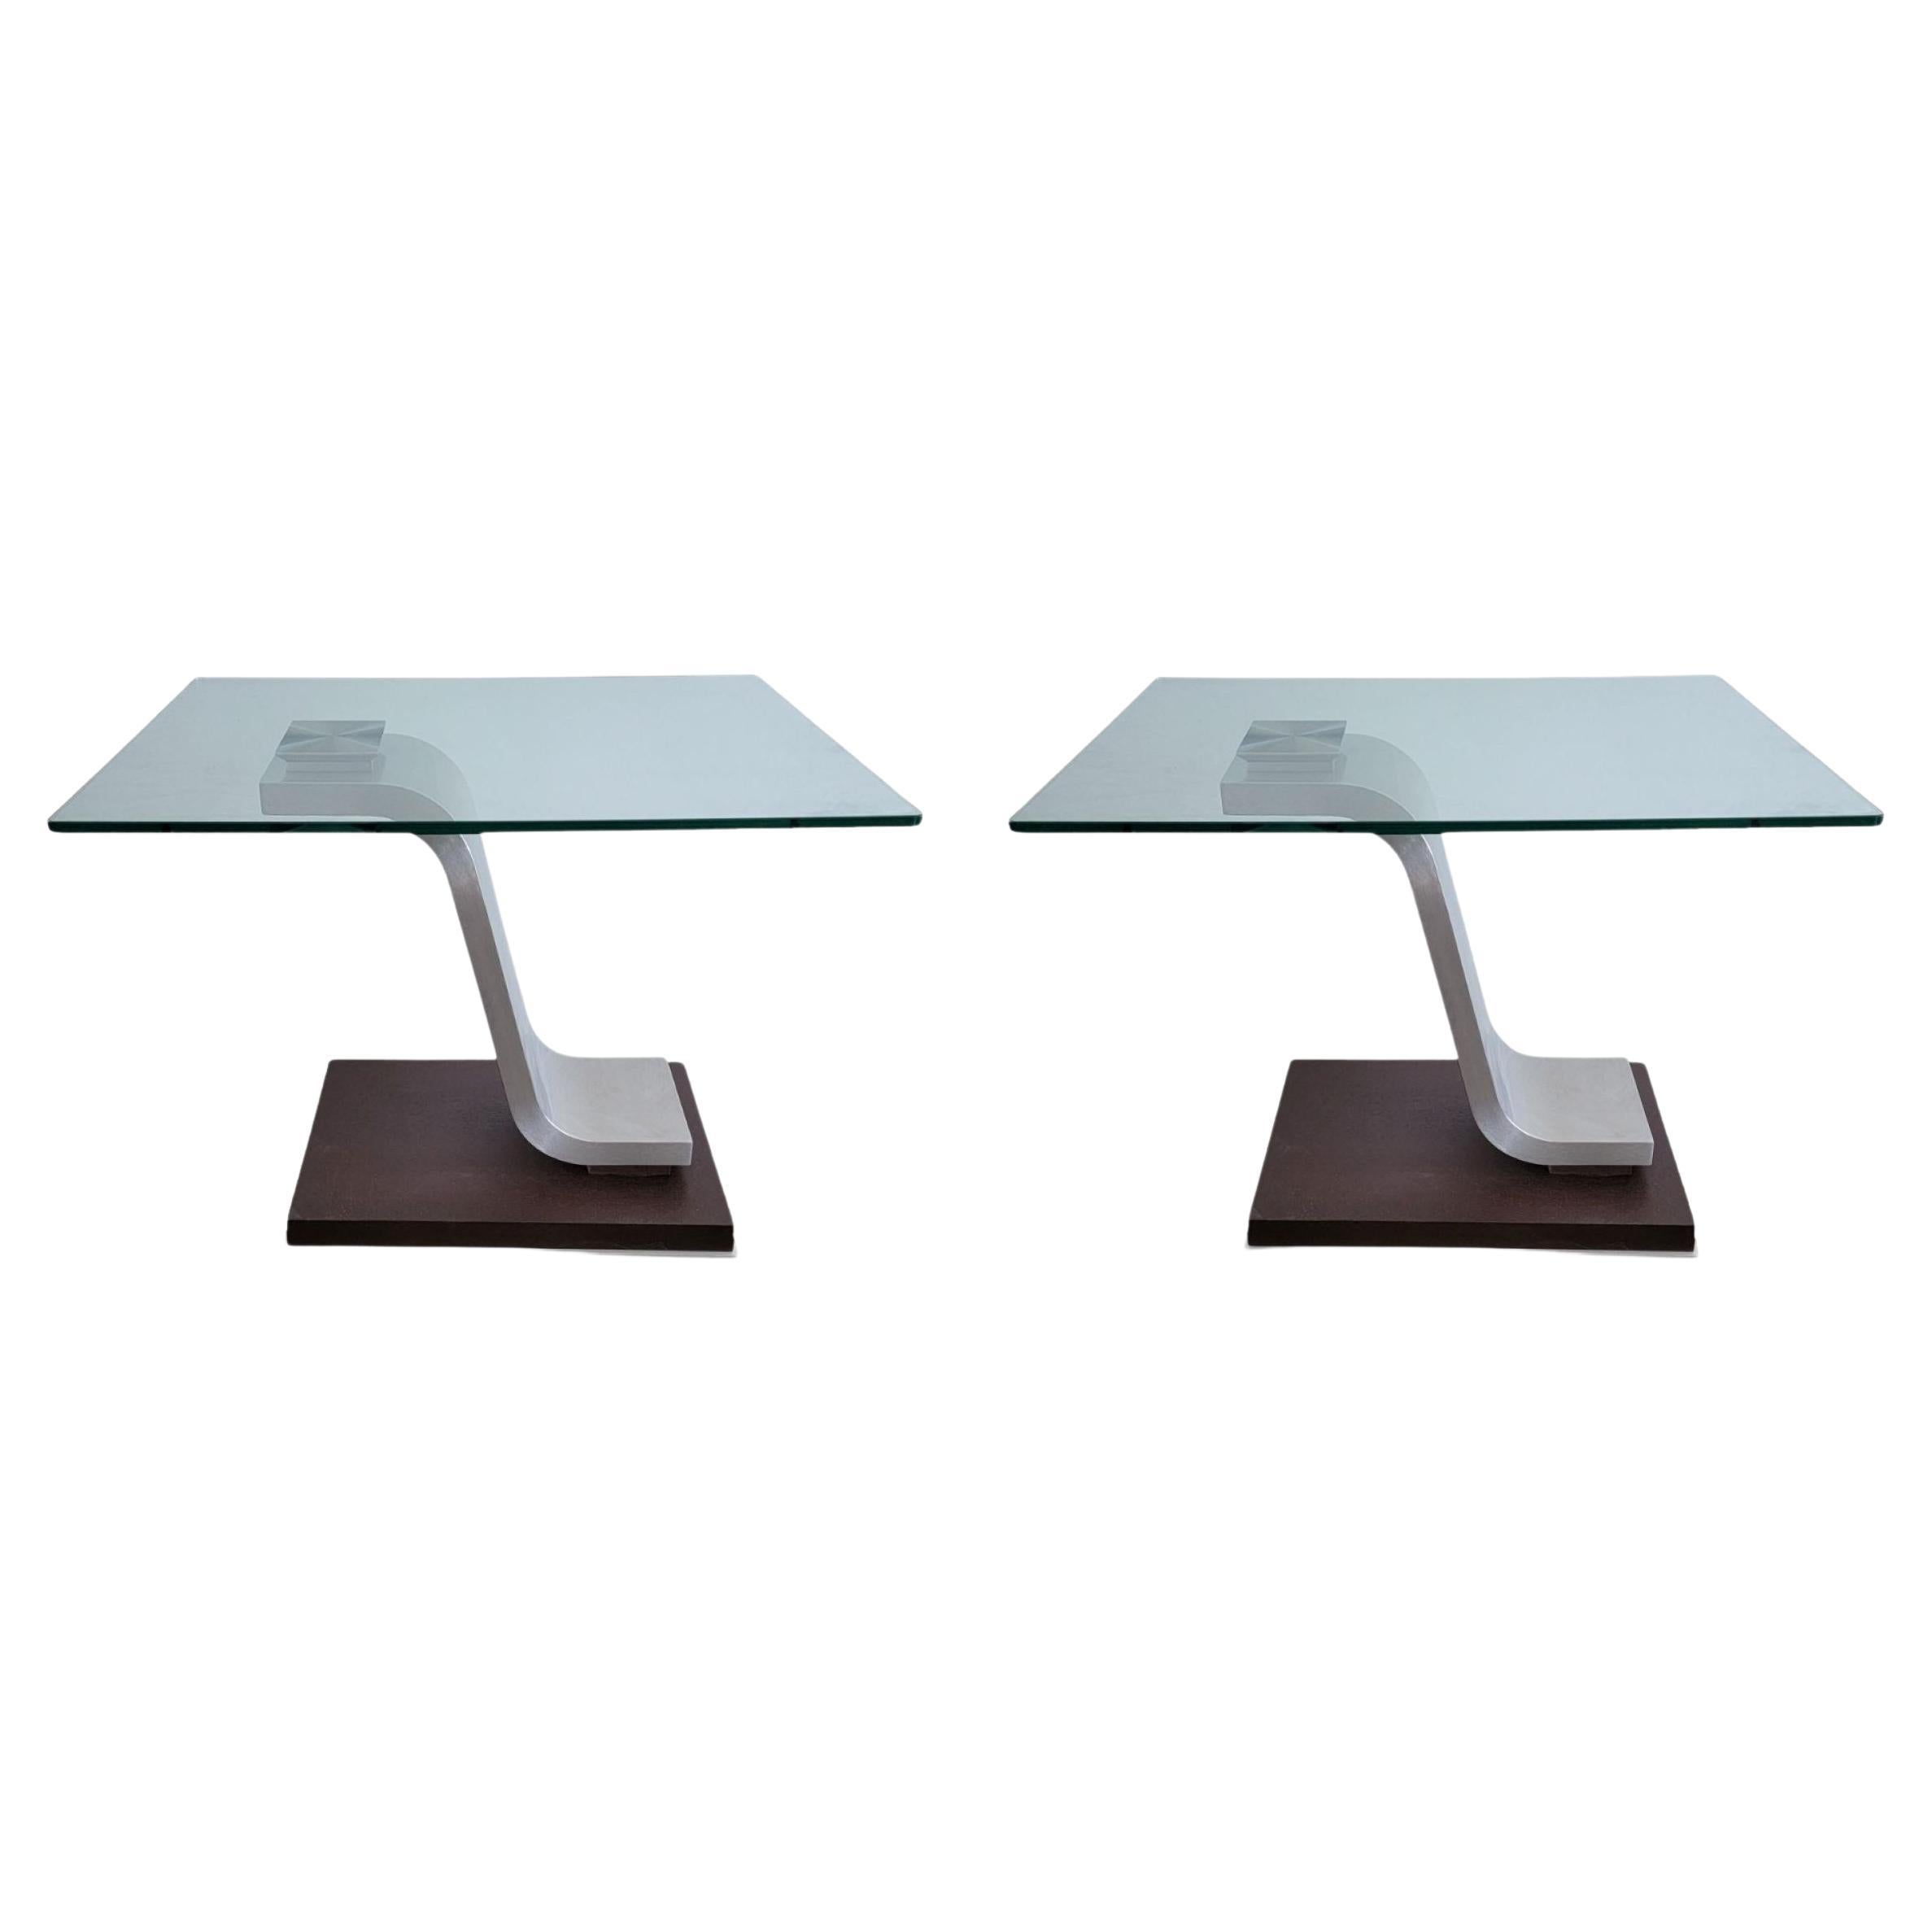 1980s Vintage Chrome and Wooden Chrome Side Tables, a Pair For Sale